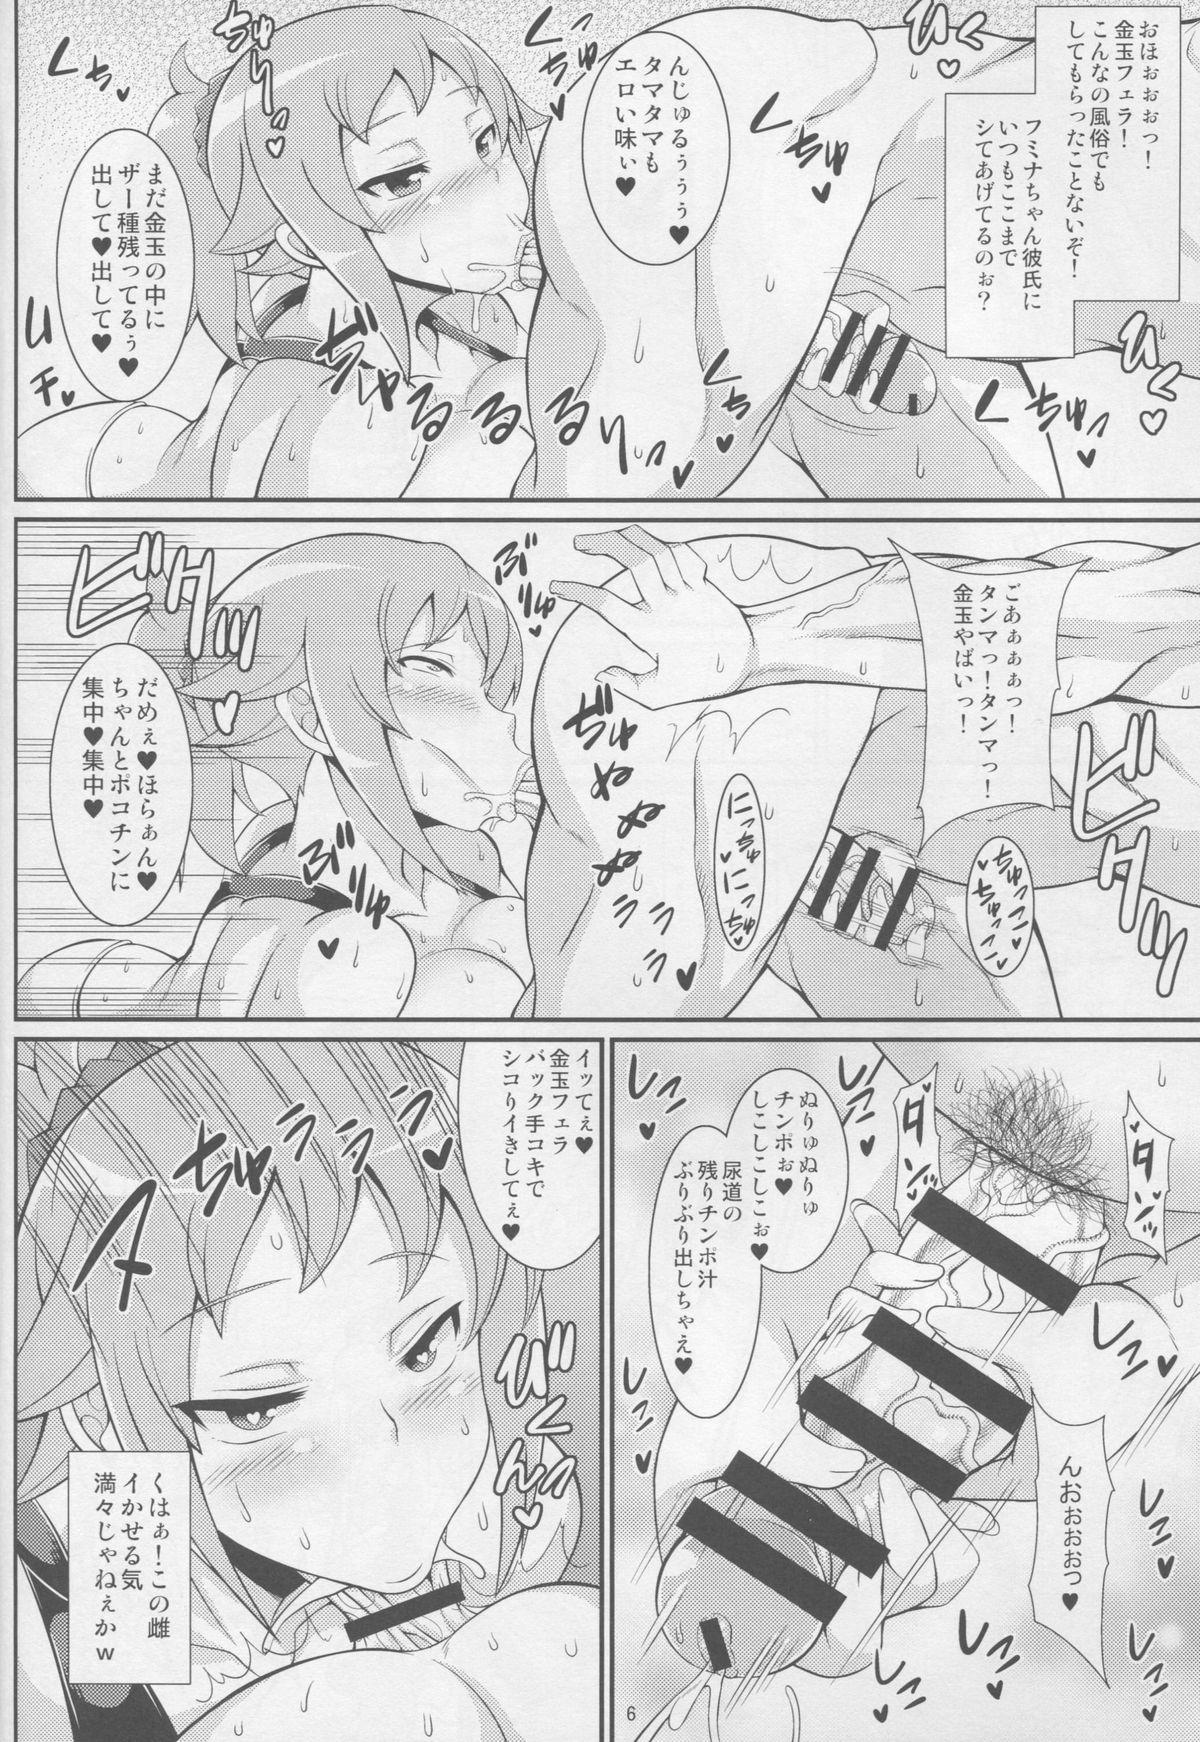 For Senpai no Ero Ana - Gundam build fighters try Selfie - Page 5